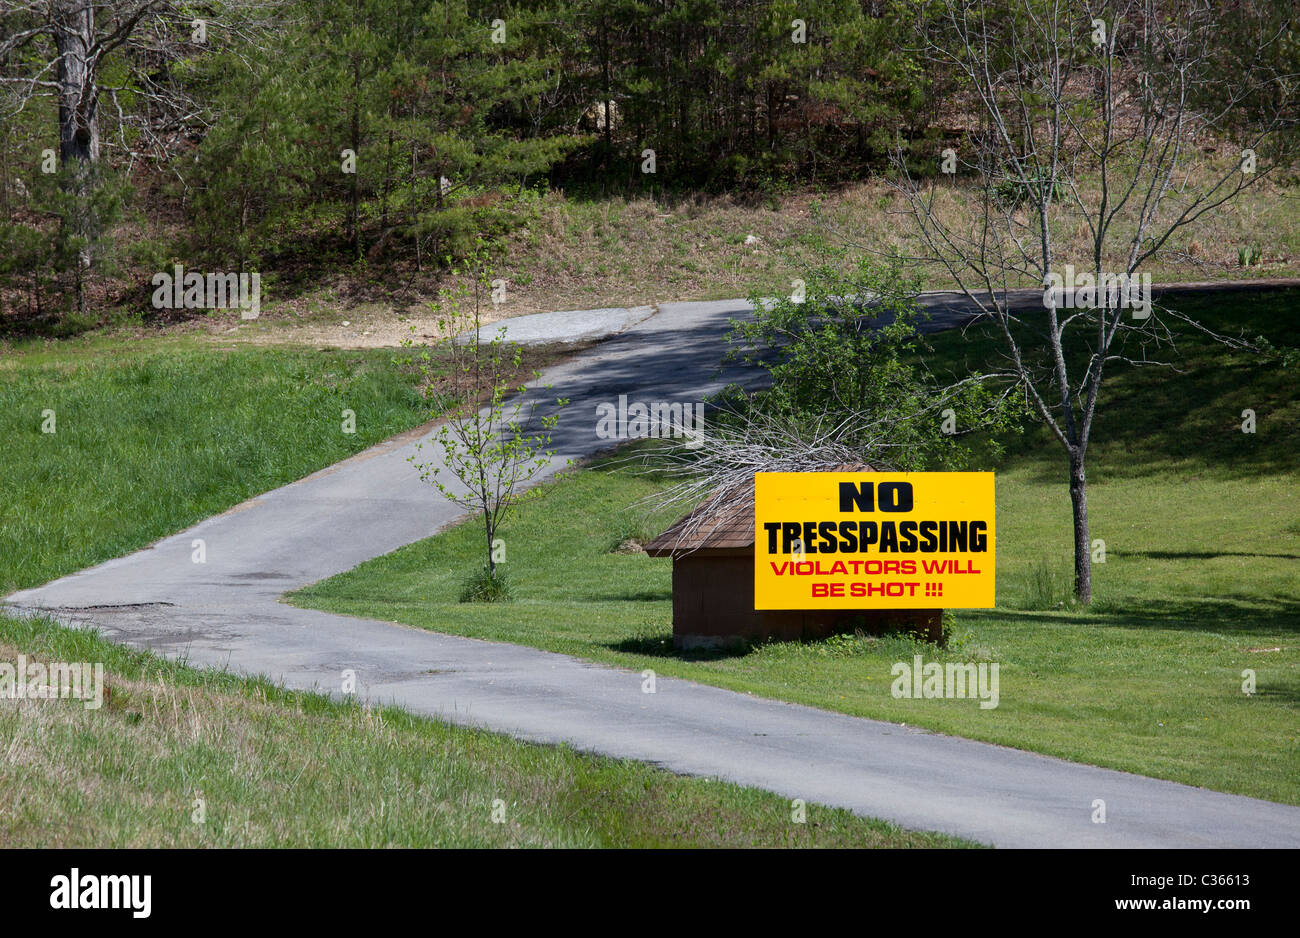 Spring City, Tennessee - A sign on private property warns that trespassers will be shot. Stock Photo